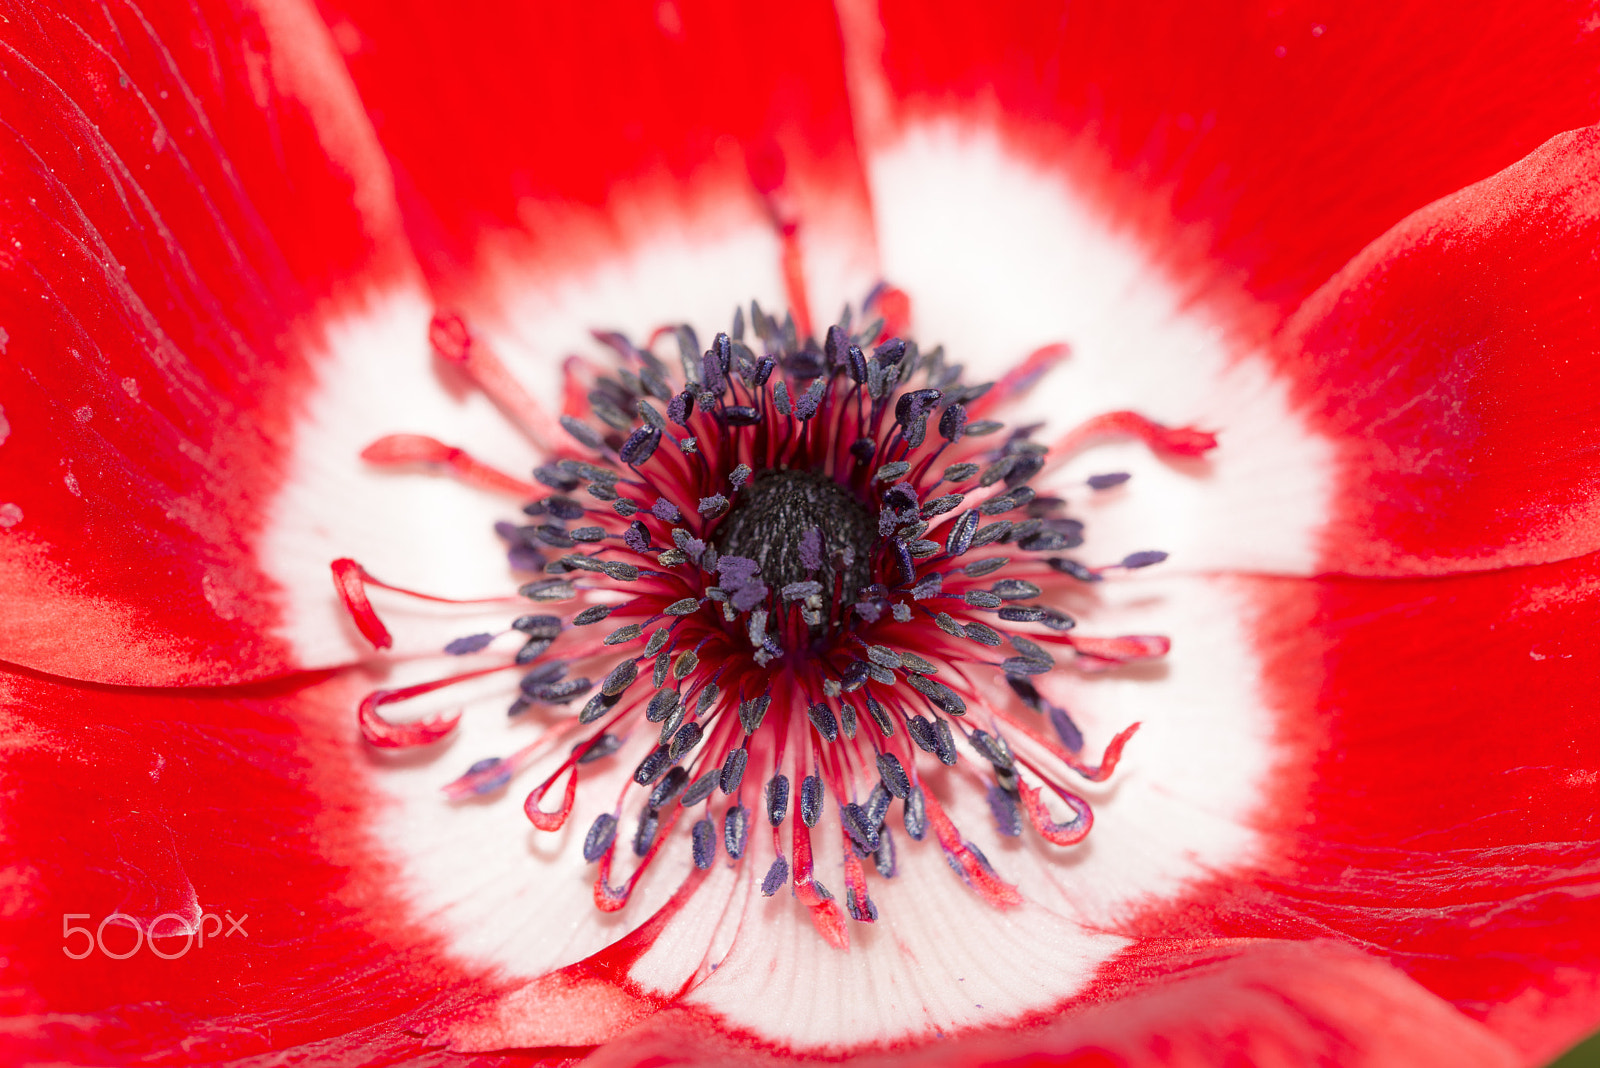 Nikon D800 + Nikon AF Micro-Nikkor 200mm F4D ED-IF sample photo. Red anemone harmony photography